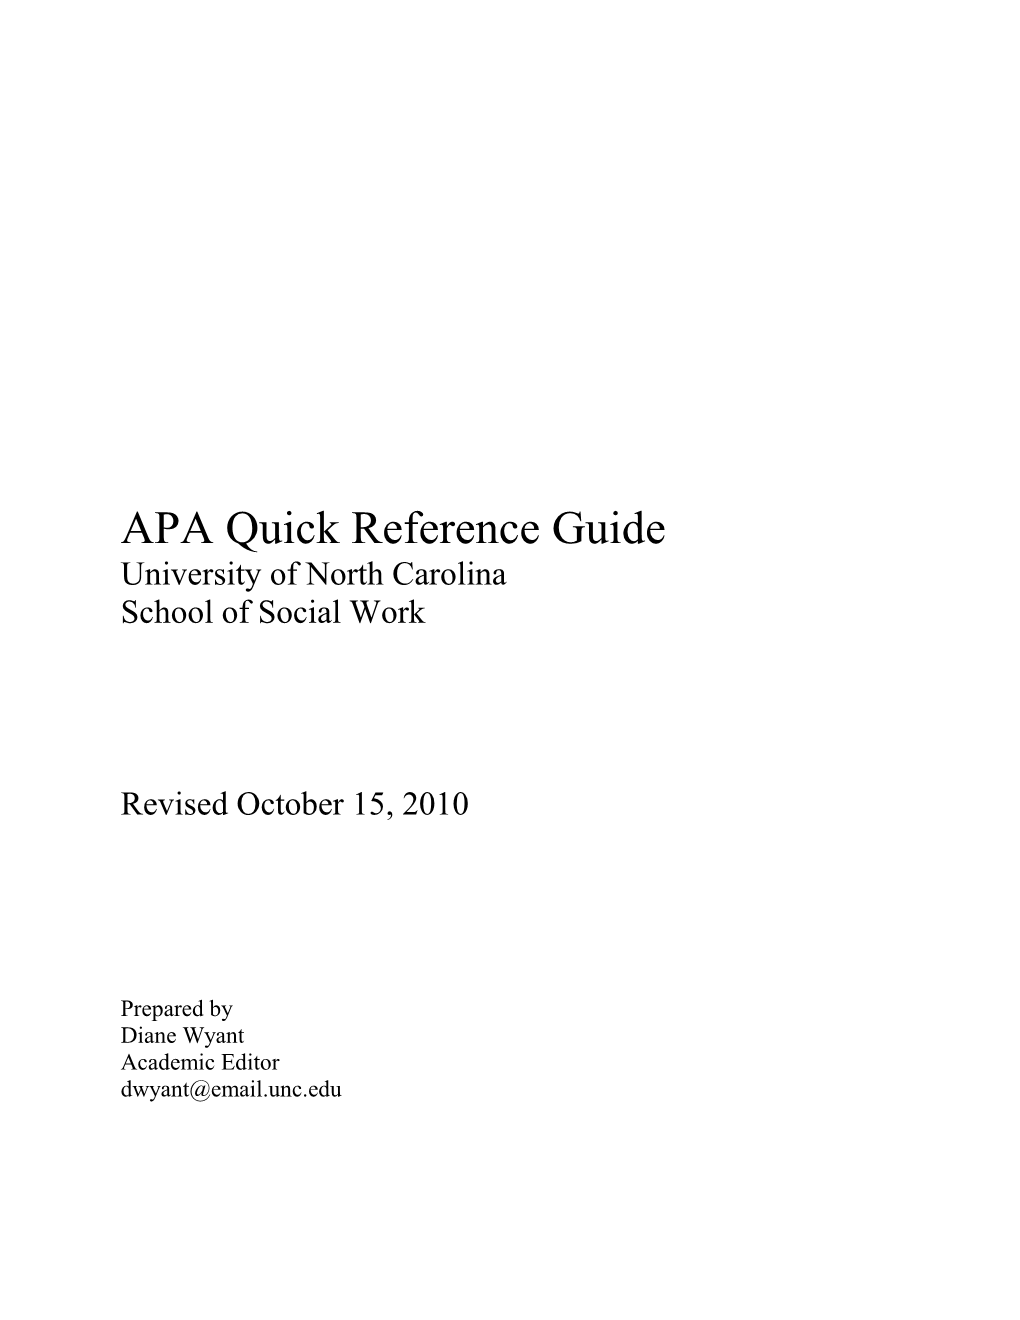 APA Quick Reference Guide University of North Carolina School of Social Work